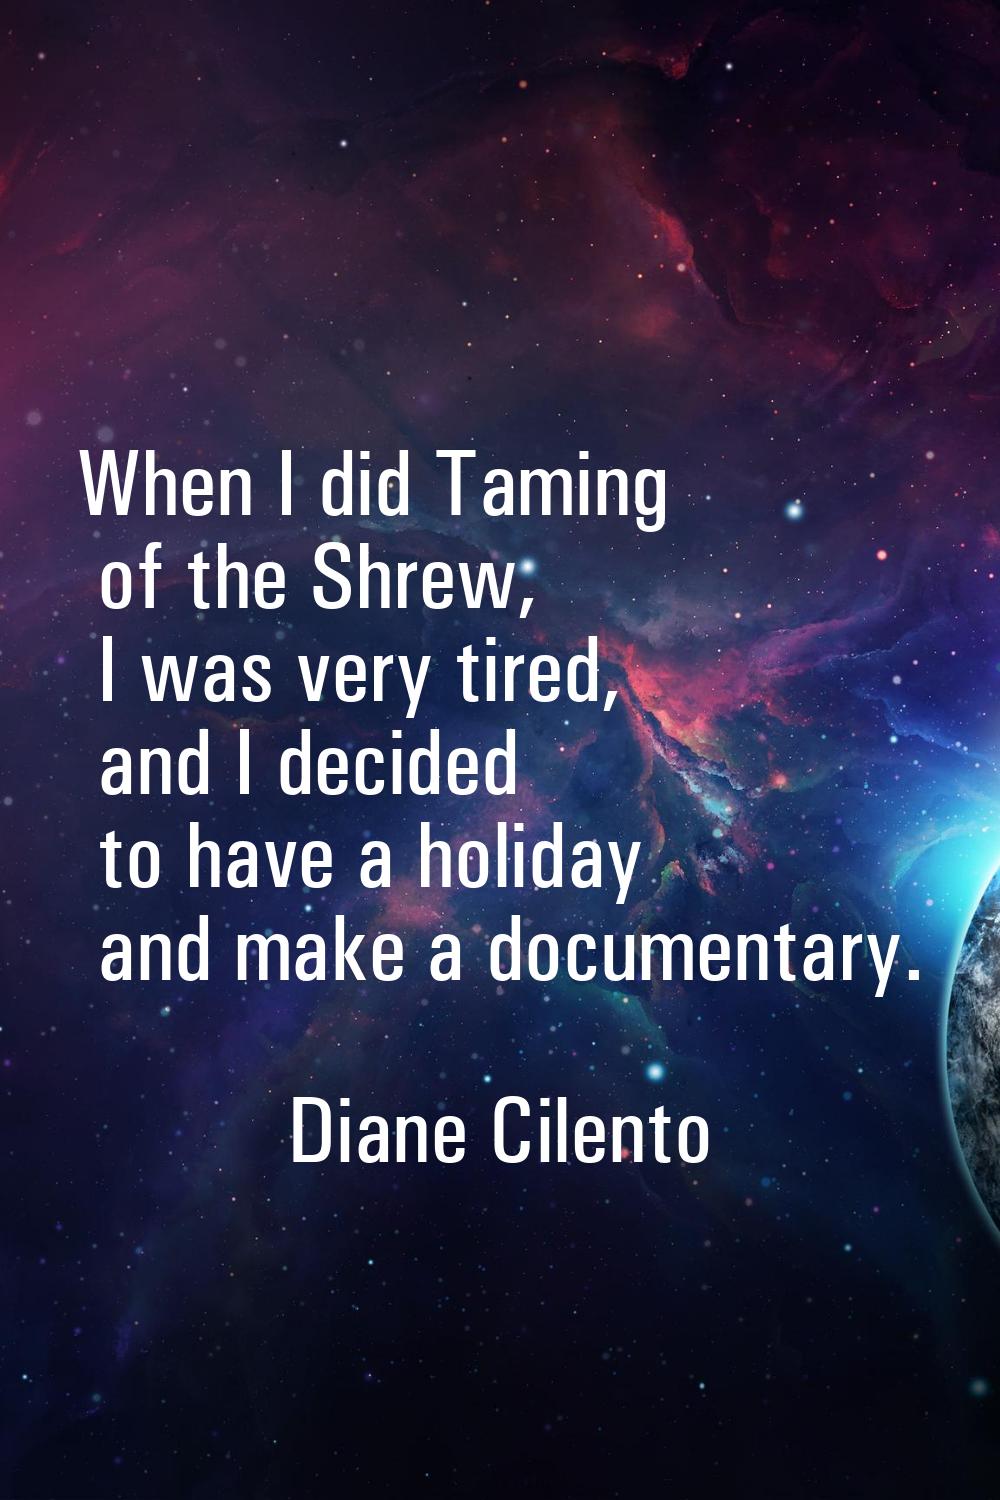 When I did Taming of the Shrew, I was very tired, and I decided to have a holiday and make a docume